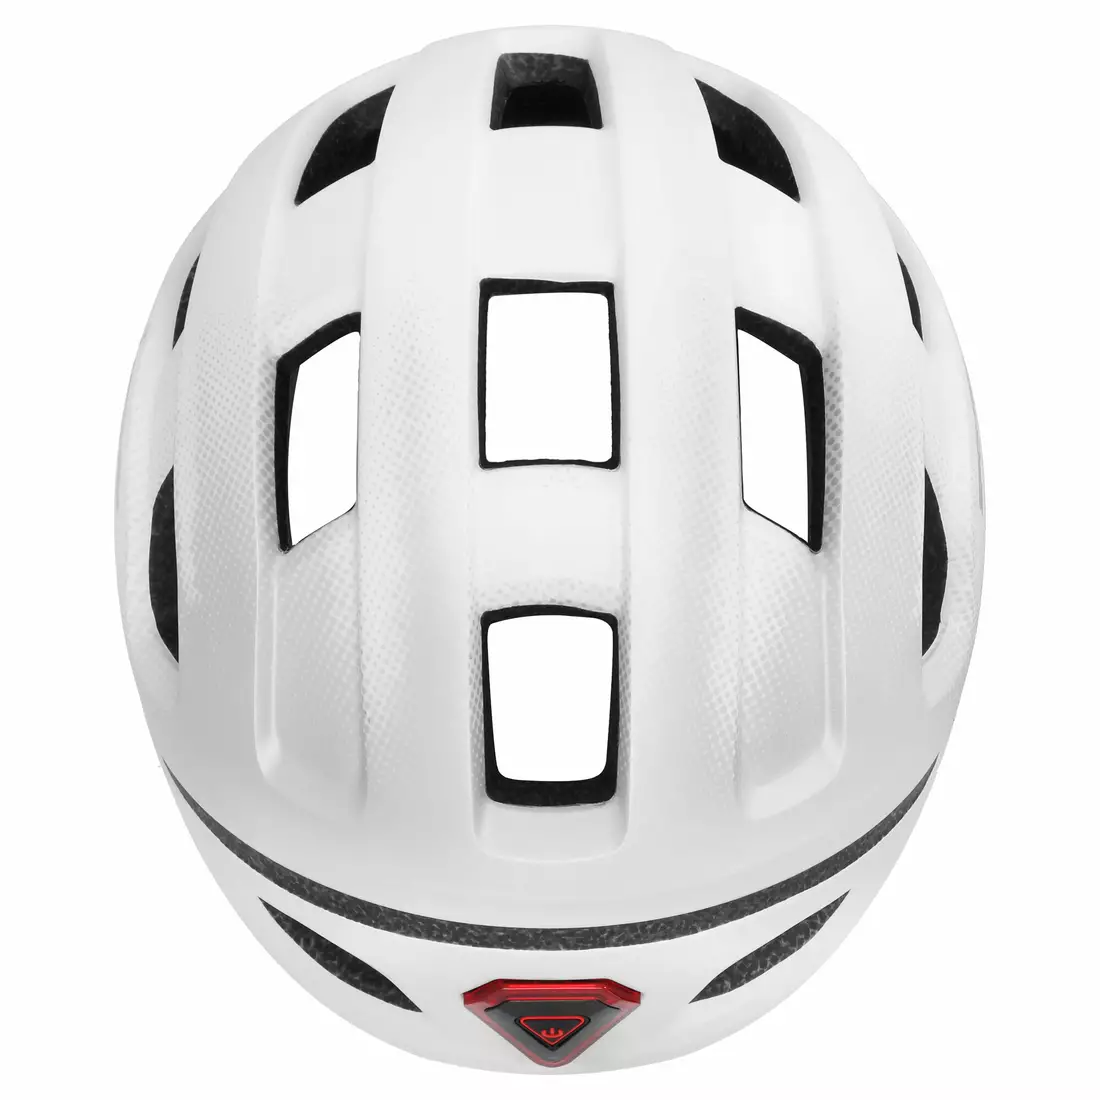 SPOKEY POINTER SPEED bicycle helmet with lights, white